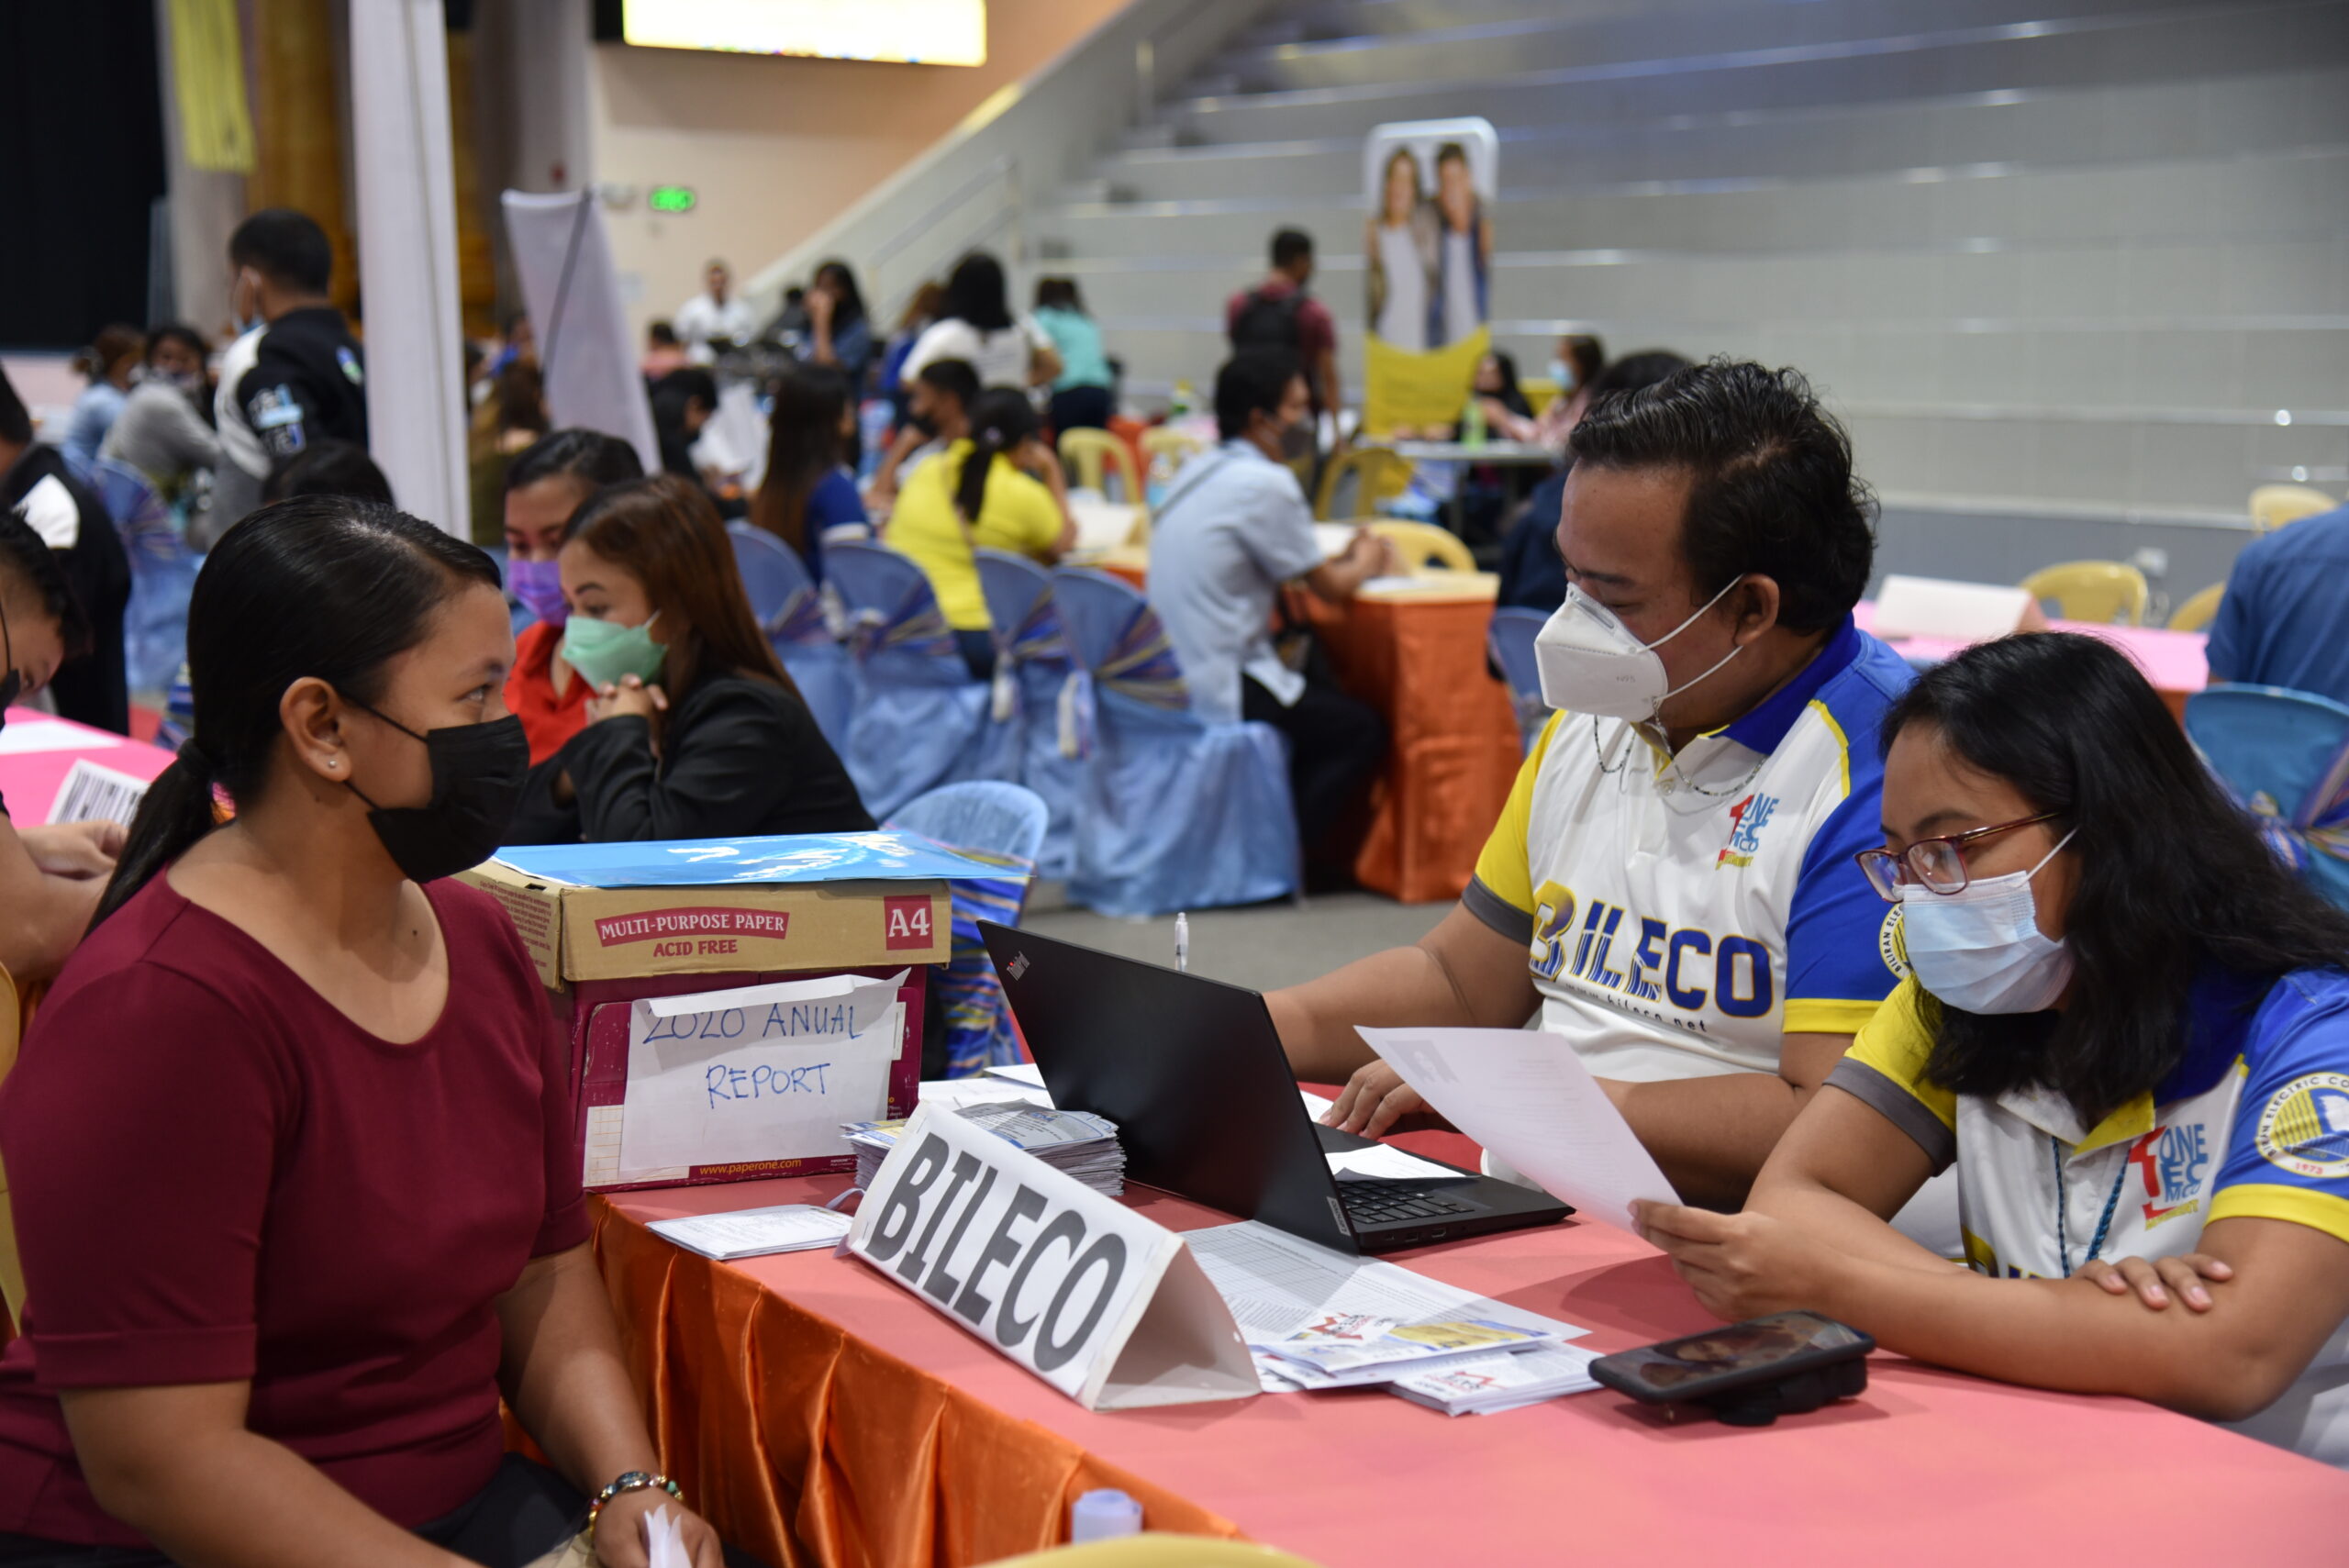 You are currently viewing BILECO participated in the One-Stop Shop and Job Fair conducted by BiPSU